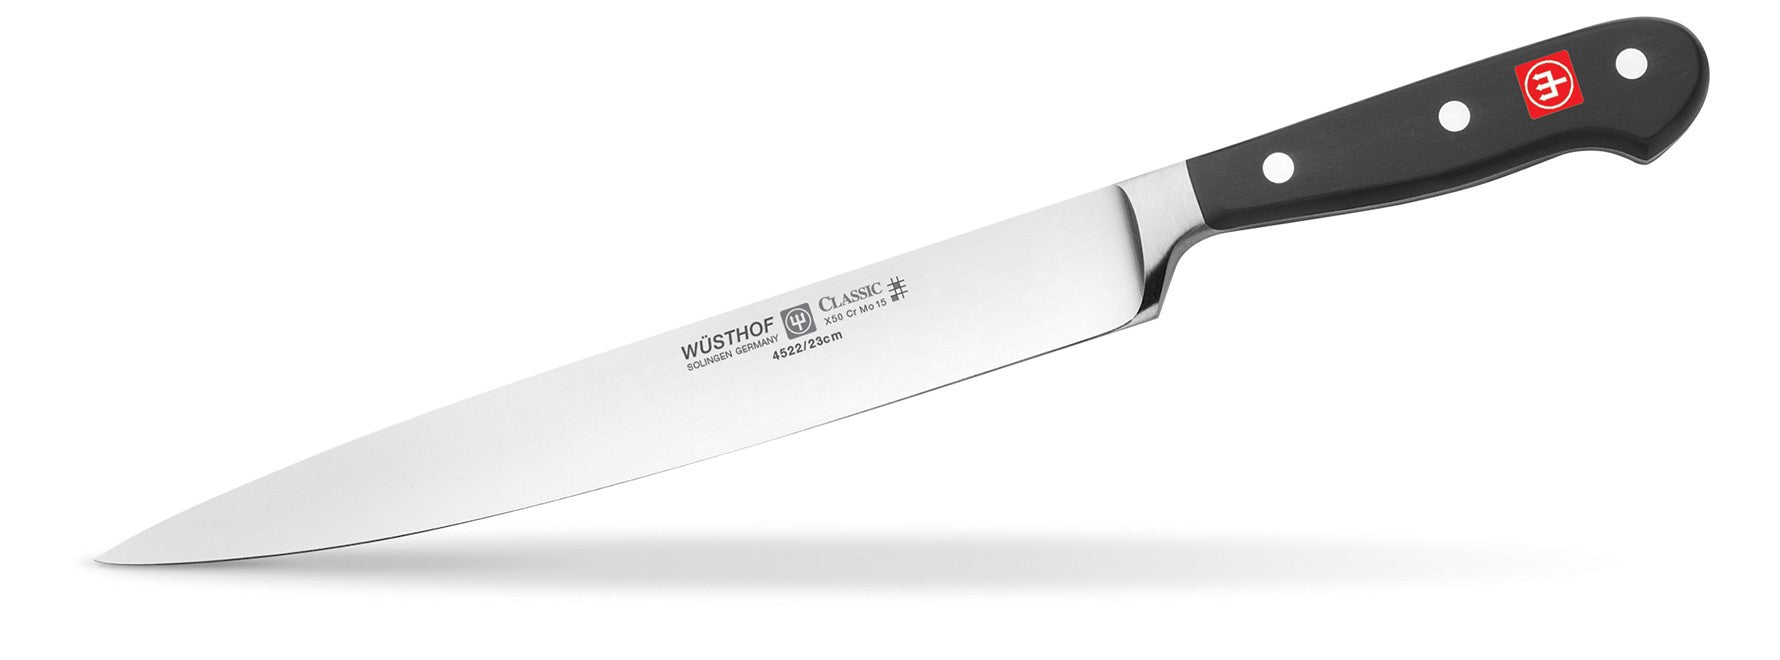 Wusthof Classic 9 Inch Carving Knife